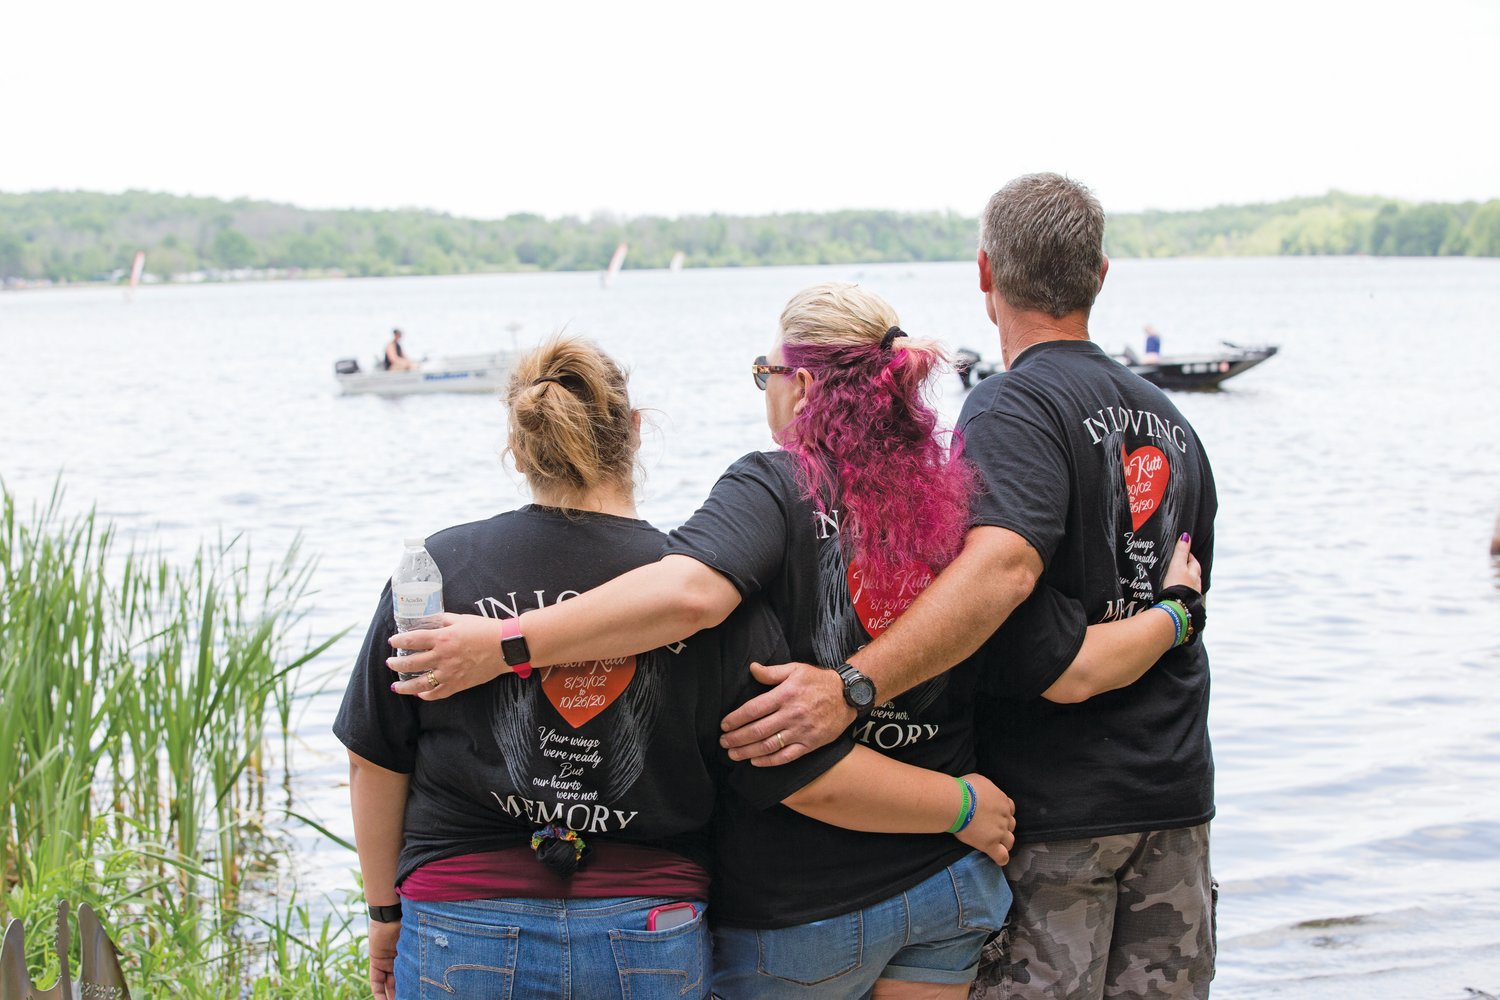 The family of Jason Kutt, an 18-year-old Sellersville resident who was fatally shot at Lake Nockamixon last October, watch a parade of boats pass by the site of a memorial bench that was dedicated in his honor on Sunday. The boats, as they passed by the shore, played one of Kutt’s favorite songs by the band Metallica. From left are Kutt’s sister, Brianna Hill; his mother, Dana Kutt; and his father, Ron Kutt.